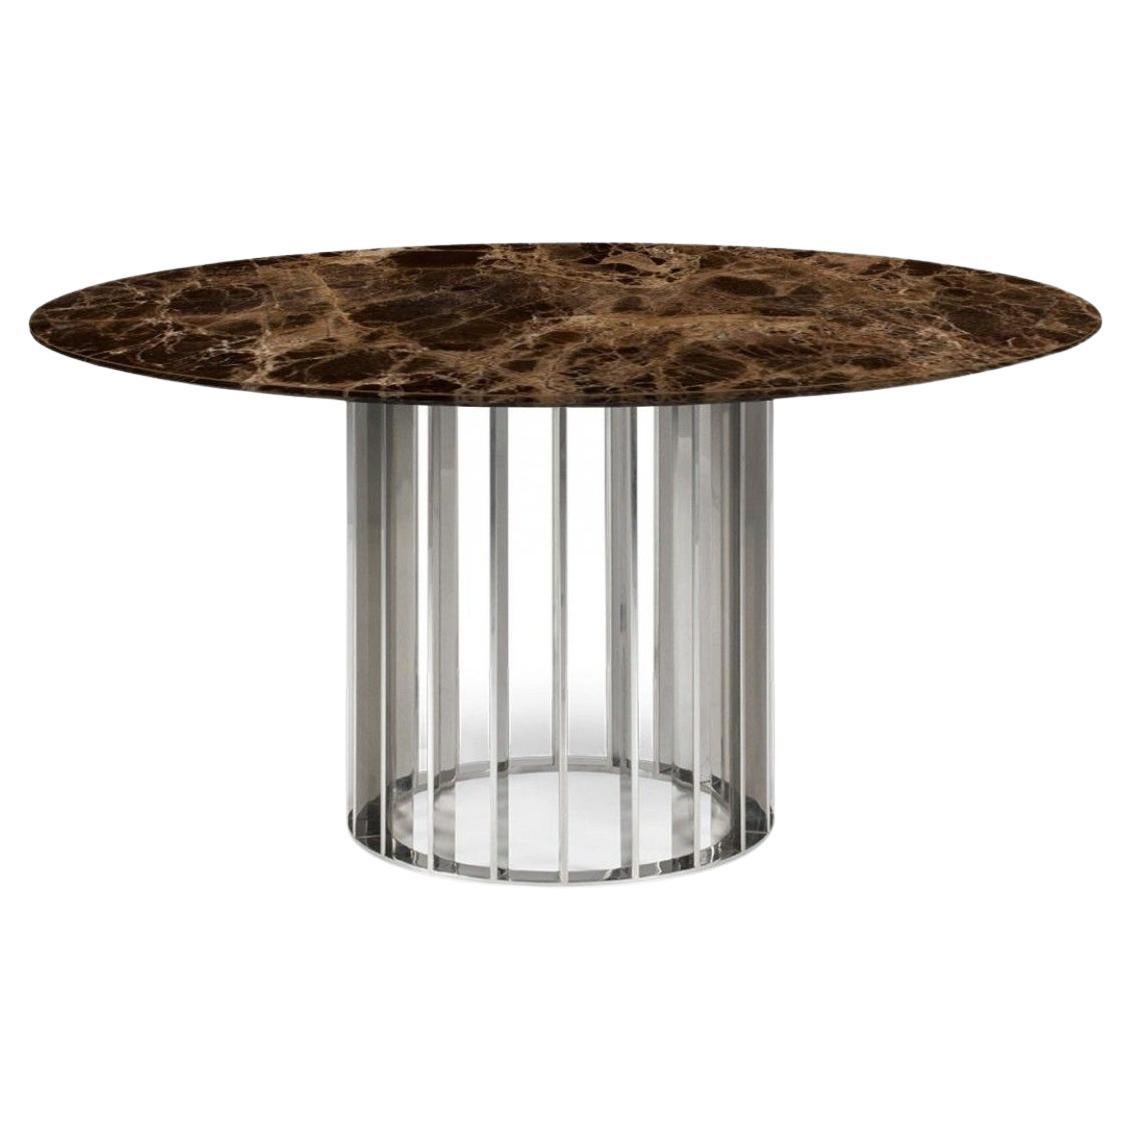 Contemporary Calacatta Marble Stainless Steel Dining Table For Sale